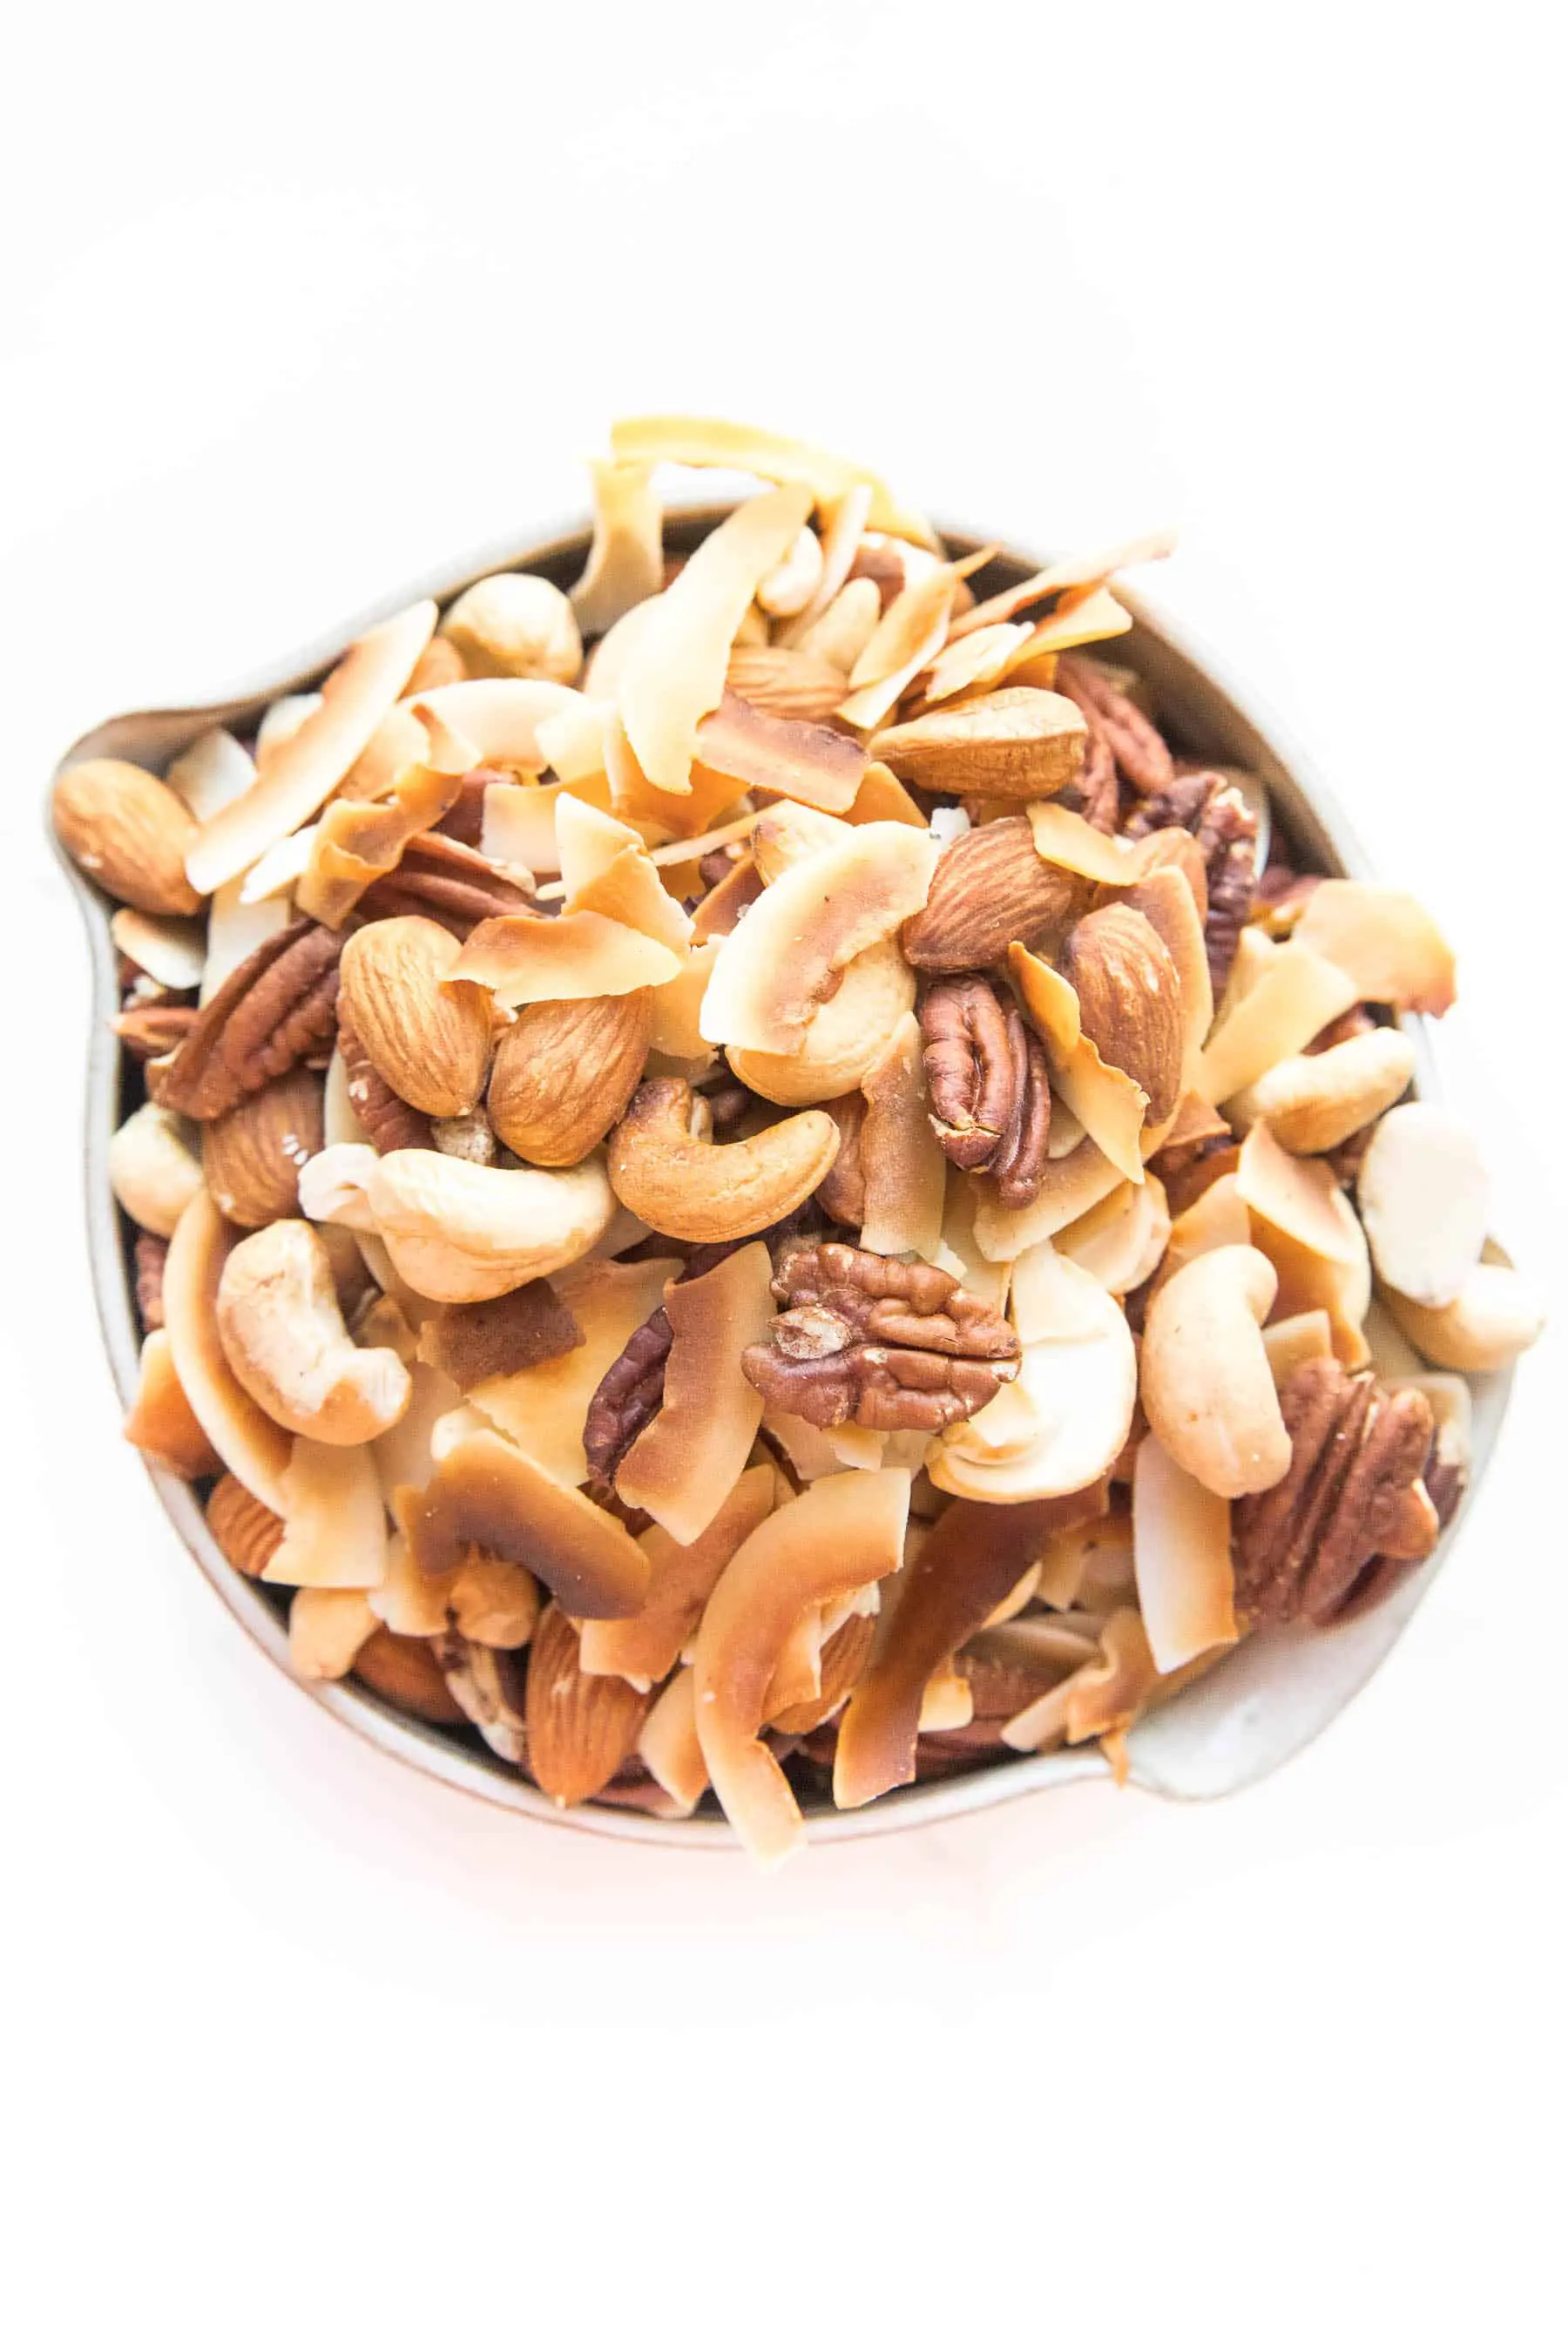 Assorted nuts and coconut chips in a bowl on a white surface